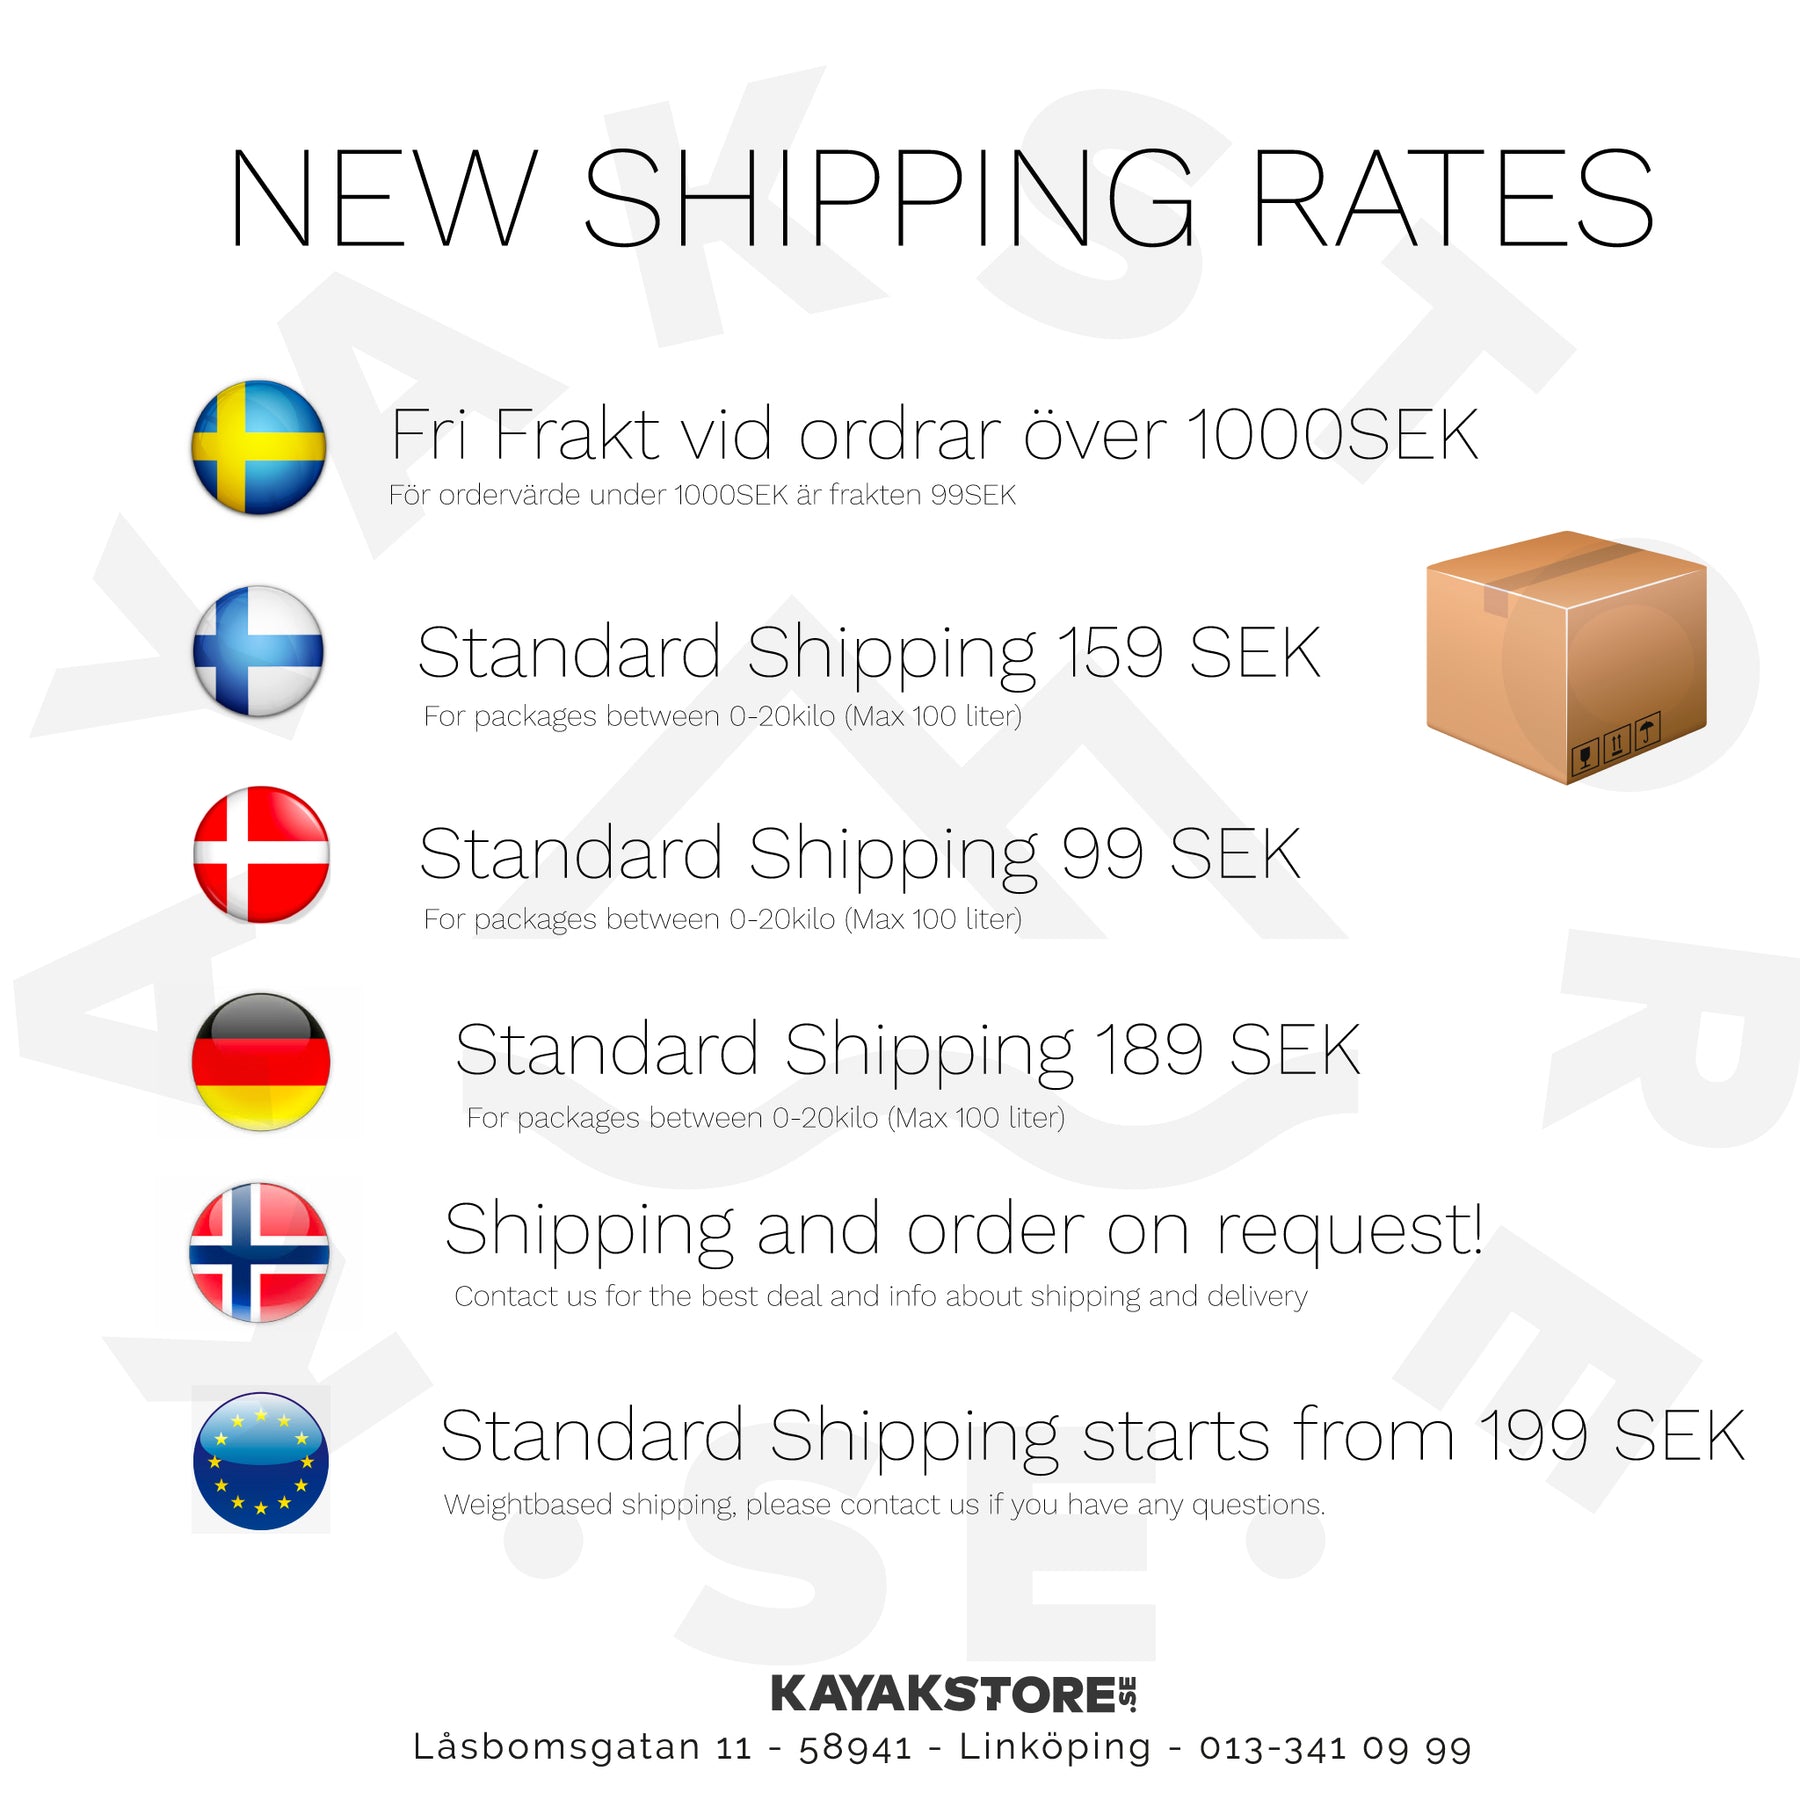 New Shipping Rates